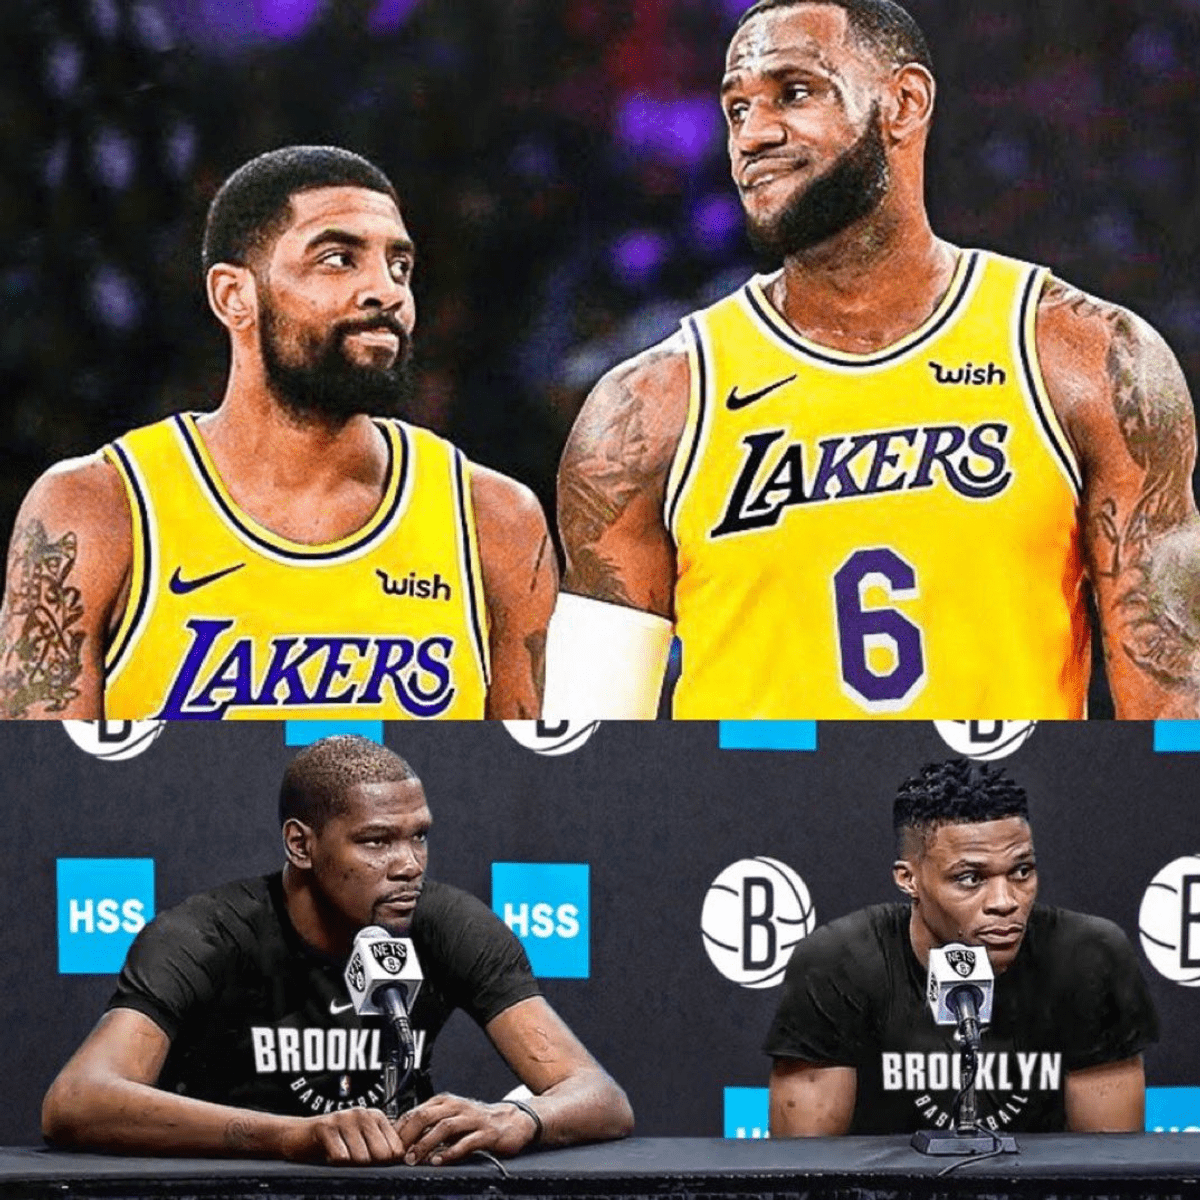 NBA Fan Posts A Pic Of LeBron James And Kyrie Irving In Lakers Jerseys, And Kevin Durant And Russell Westbrook In Nets Jerseys: "Make It Happen"